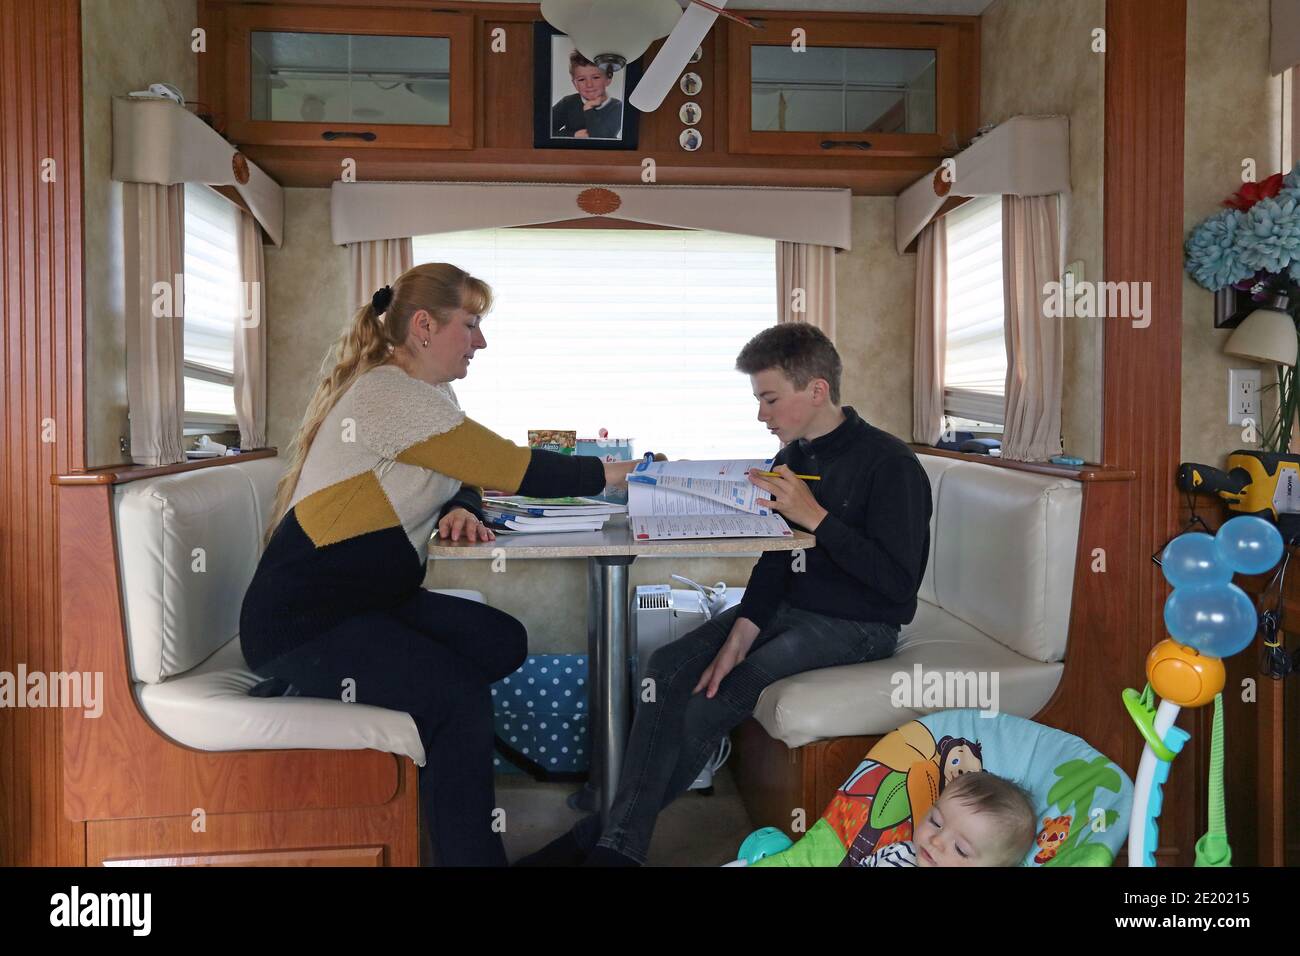 Royaume-Uni / Newport Pagnell / Pinders Circus / Homeschooling in une caravane Banque D'Images